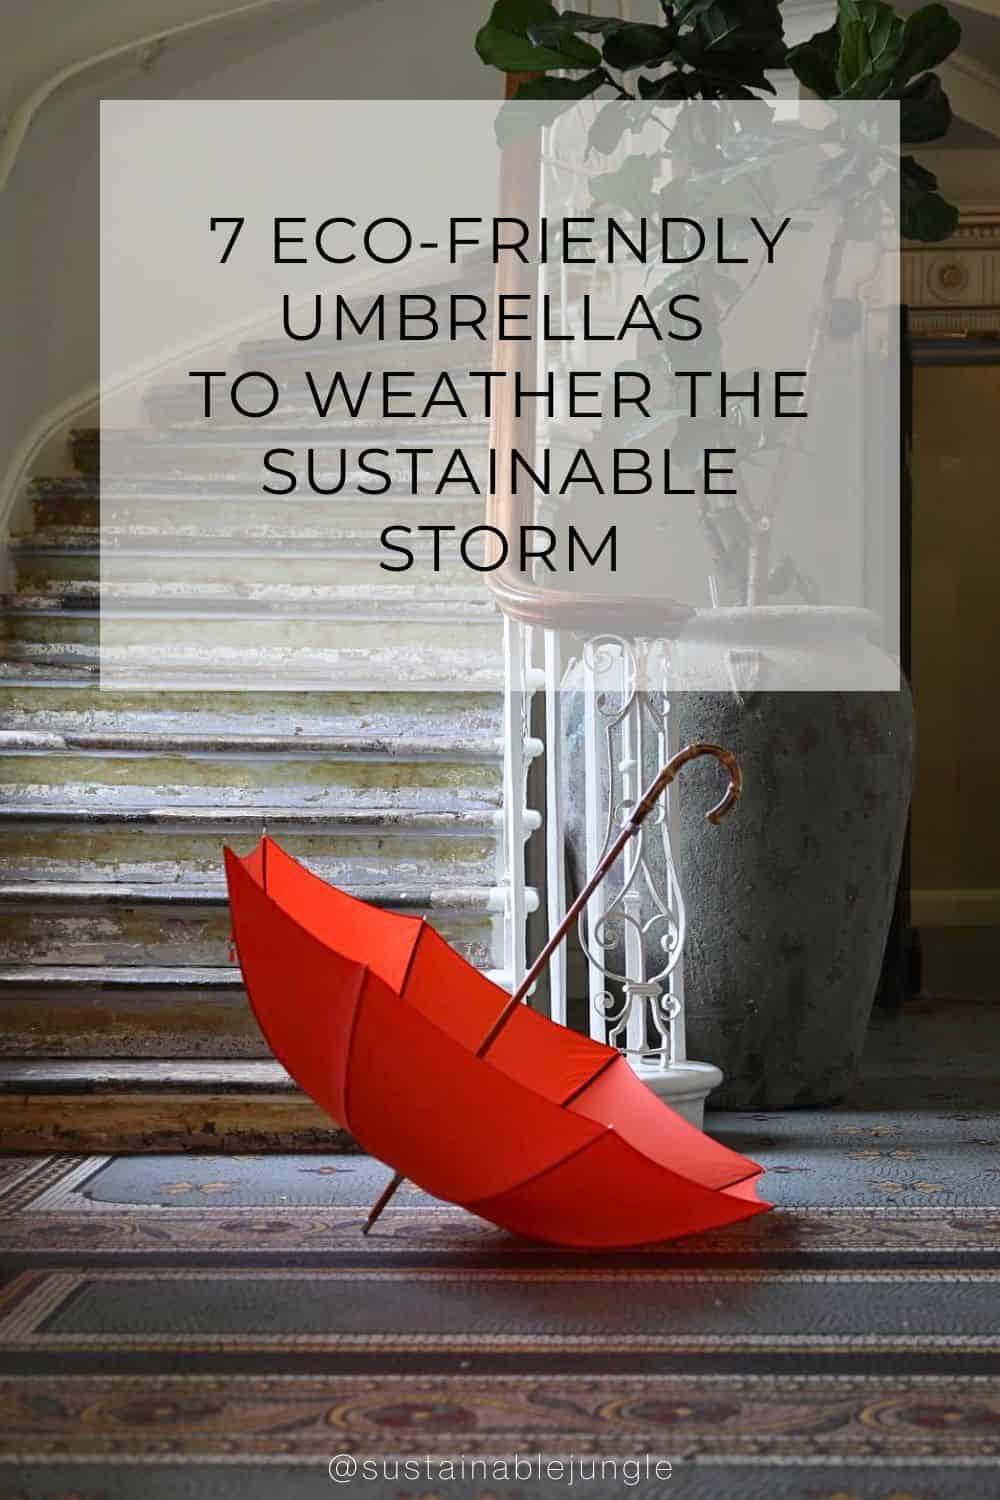 7 Eco-Friendly Umbrellas To Weather The Sustainable Storm Image by London Undercover #ecofriendlyumbrellas #sustainableumbrellas #recycledumbrella #sustainableumbrellabrands #ecoumbrella #sustainablejungle